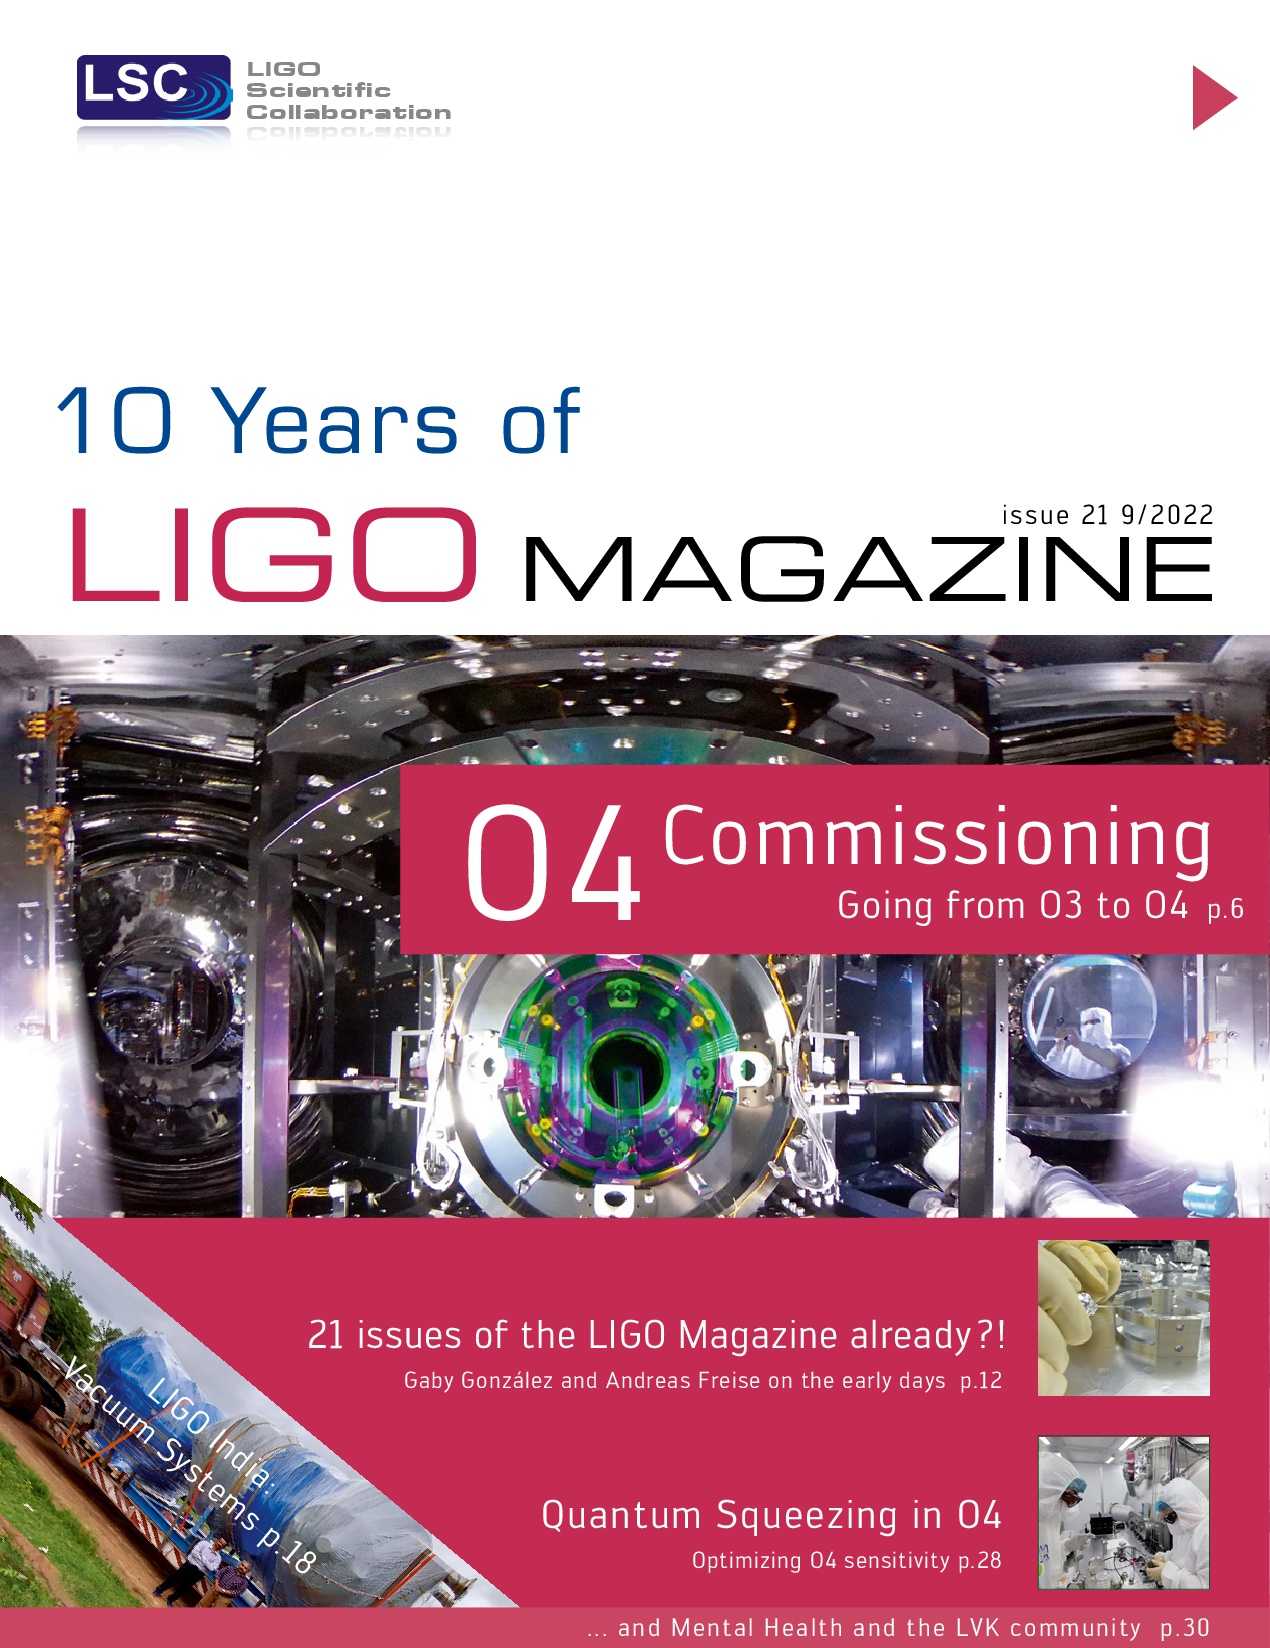 News-Image 35 of: New LIGO Magazine Issue 21 is out